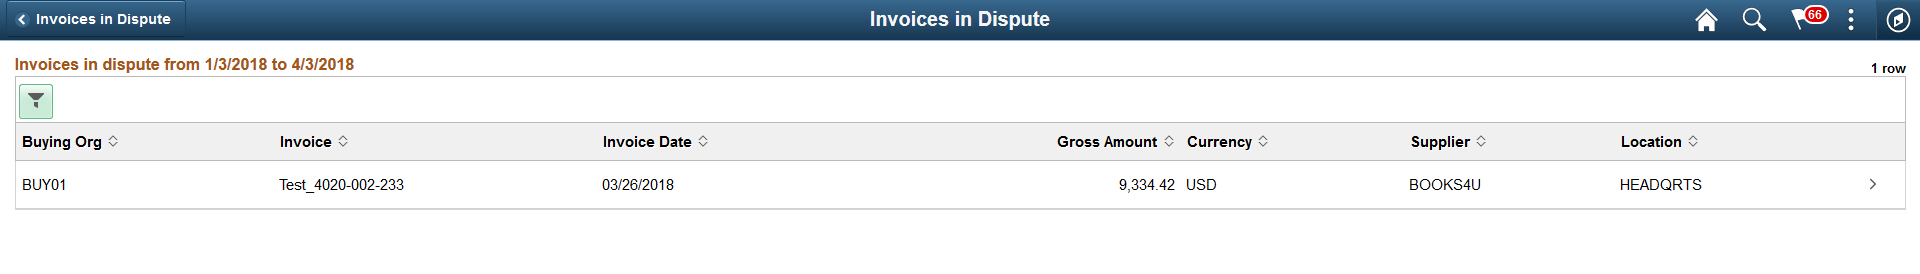 Invoices in Dispute page